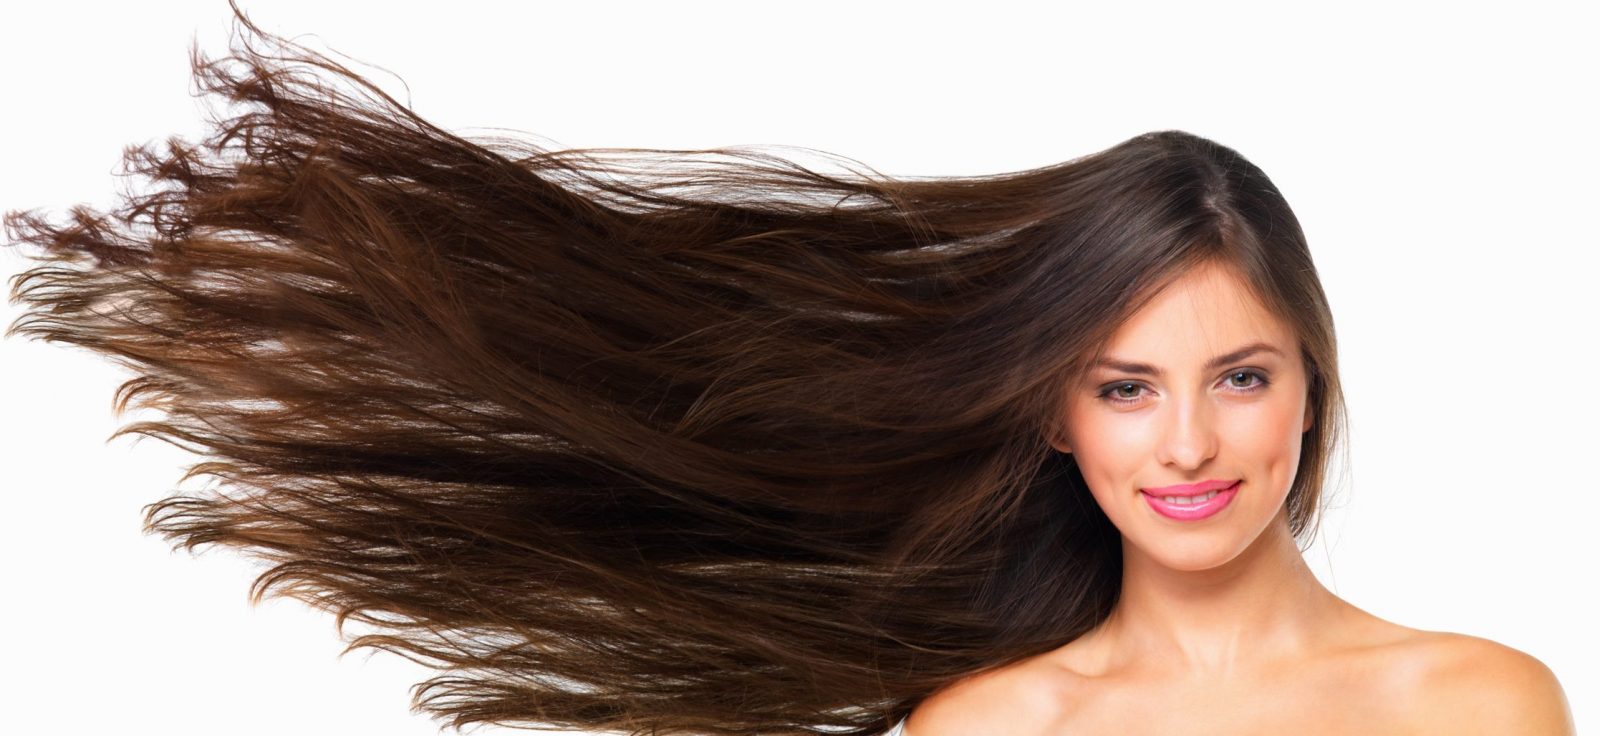 How To Speed Up Your Hair Growth Rate Viviscal Healthy Hair Tips